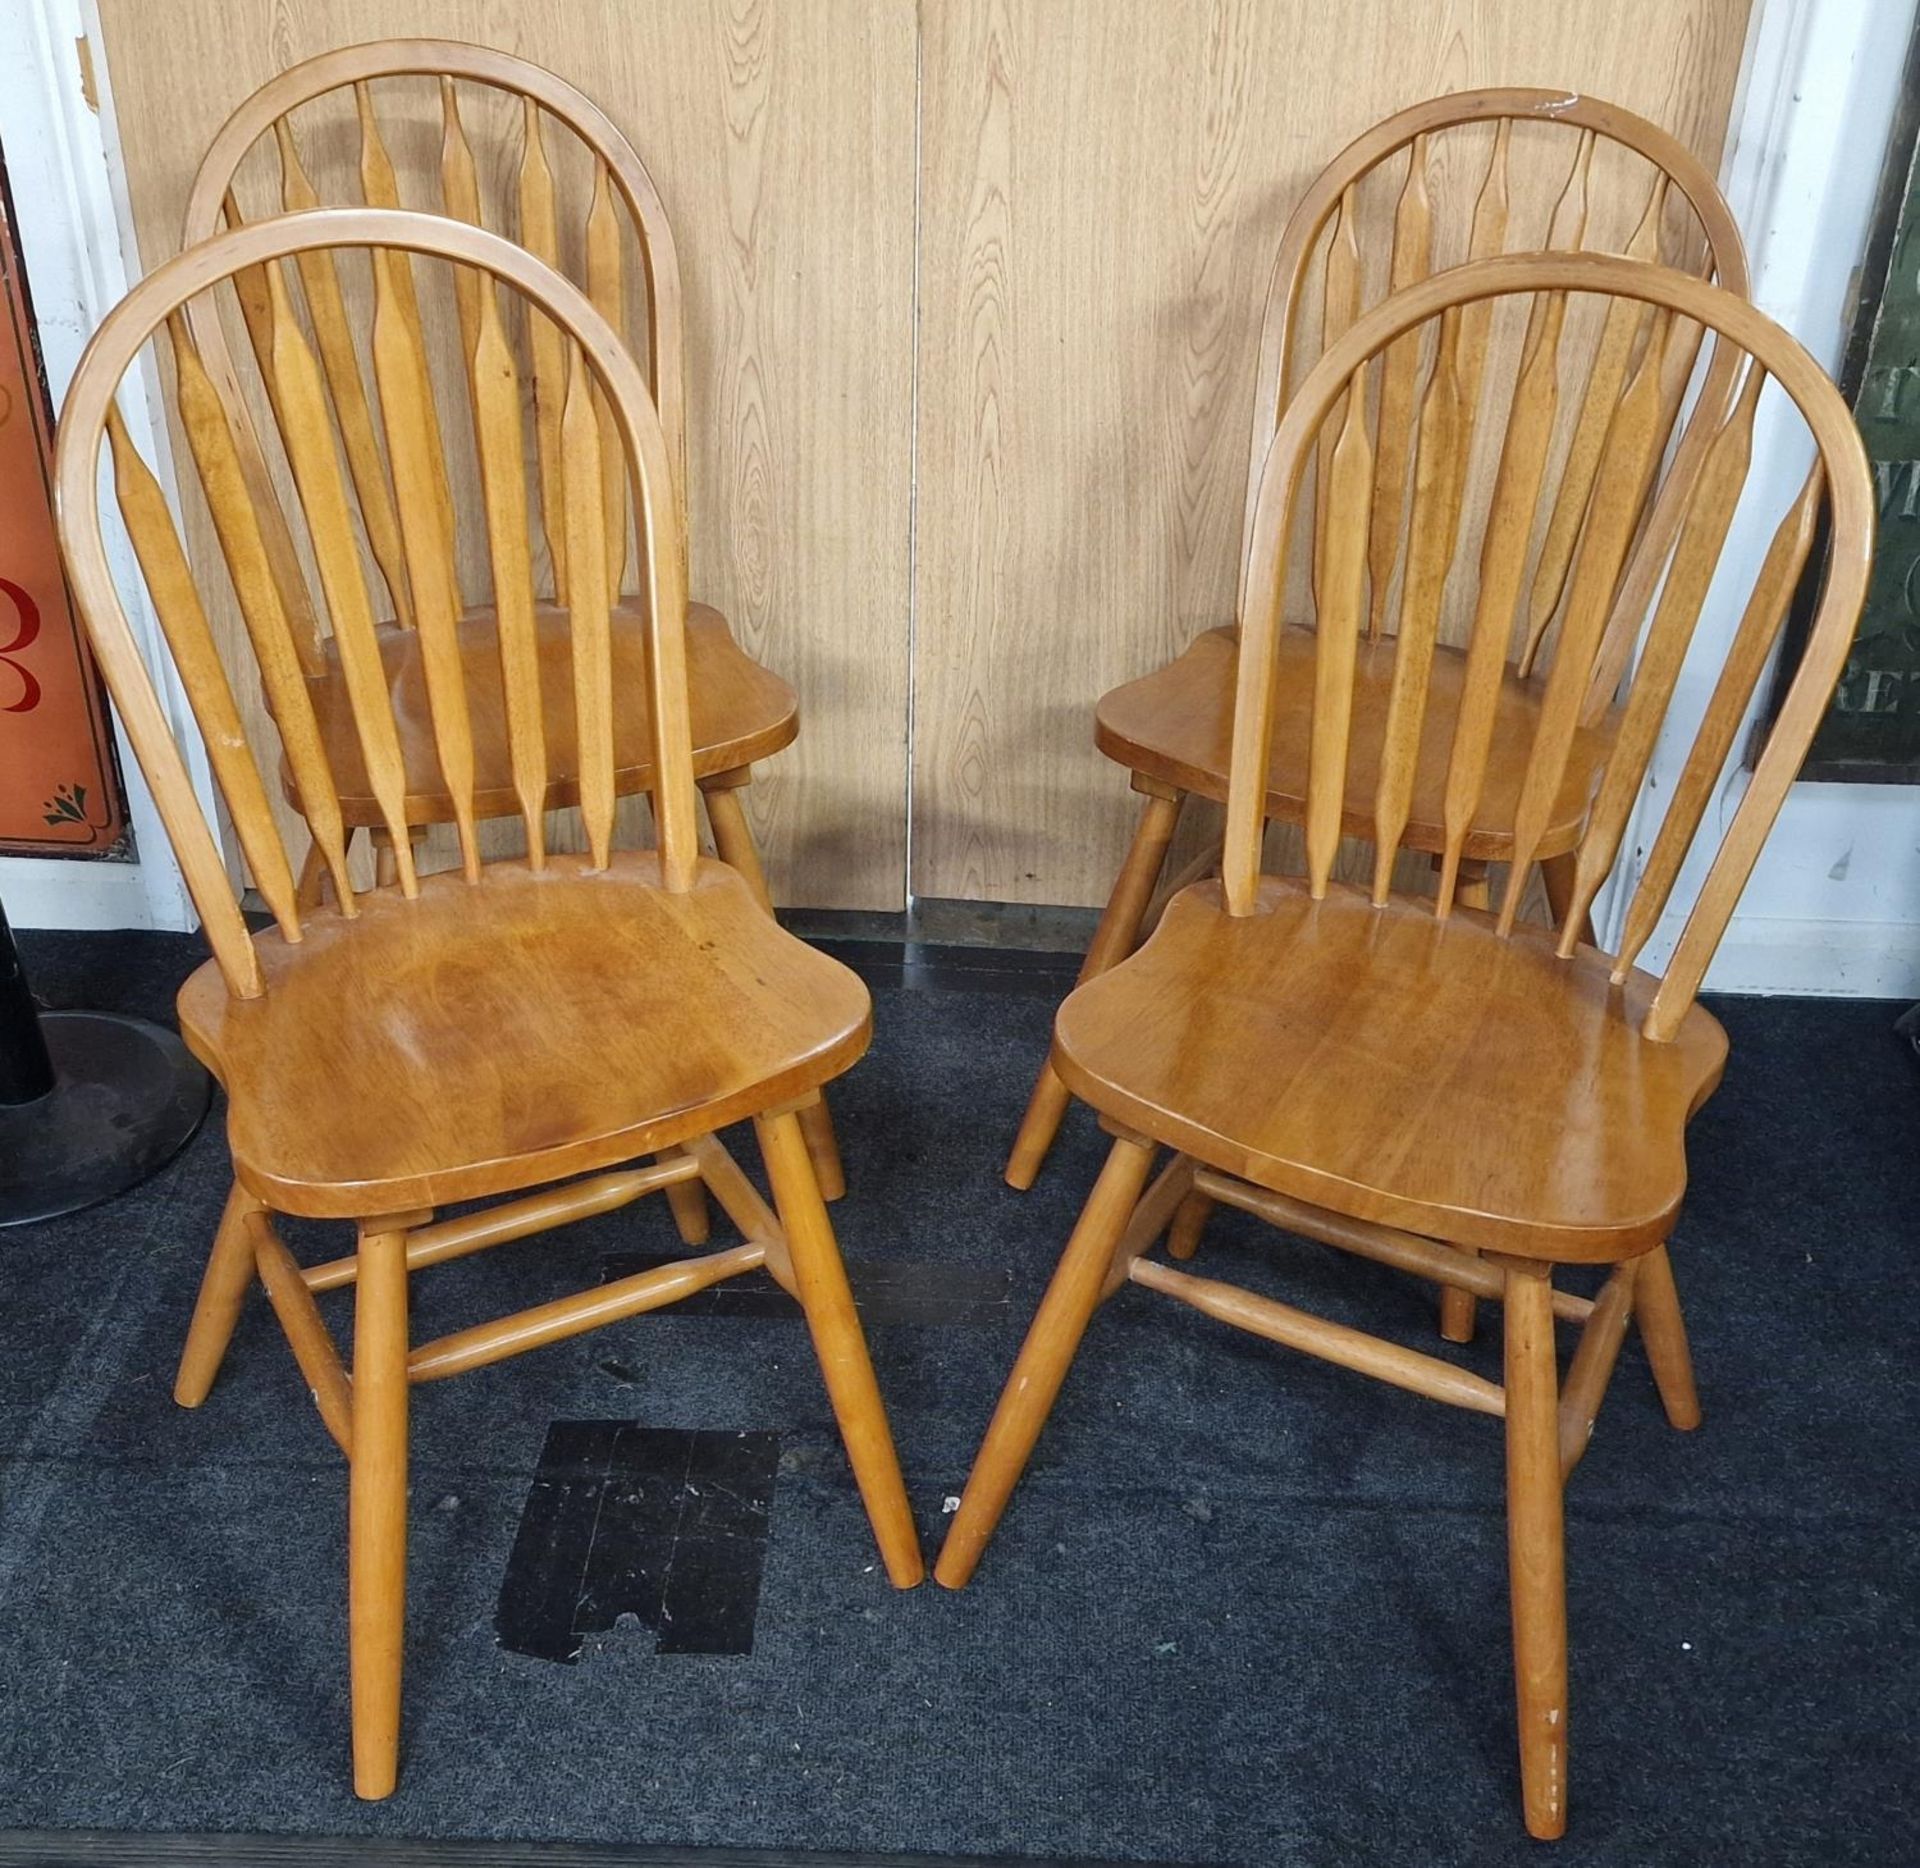 4 x contemporary pine stick back chairs